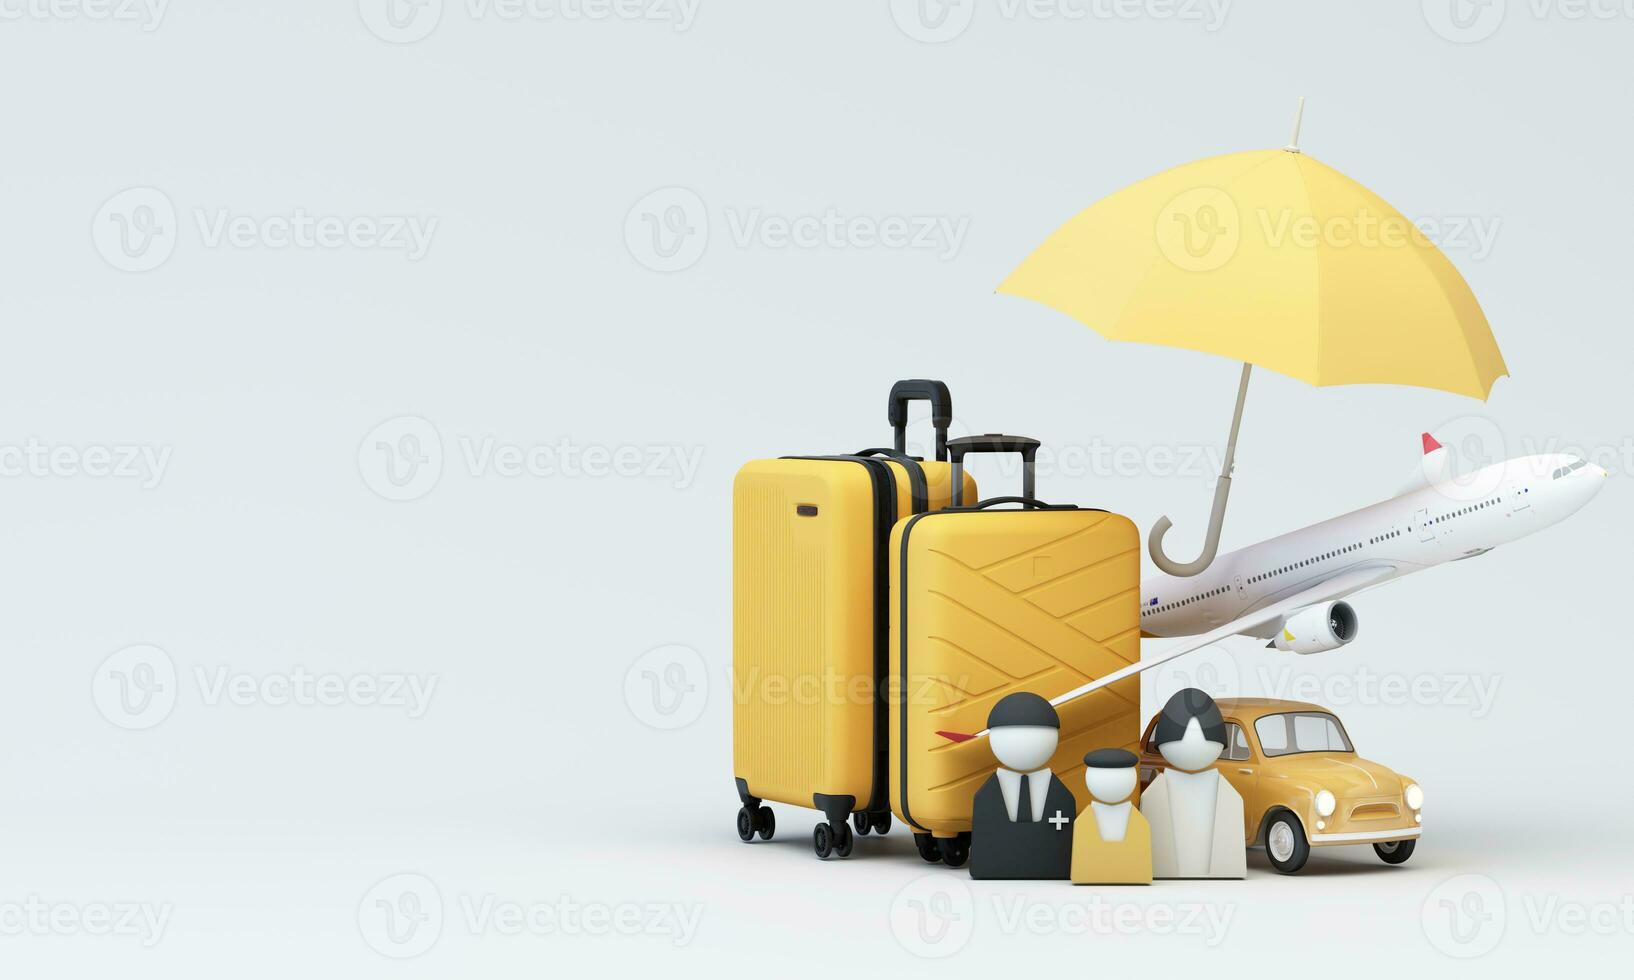 Image design, 3d rendering, background for the concept used in insurance advertisements. Travel insurance, tourism and tourists, both planes and cars, consisting of luggage, yellow umbrellas. photo